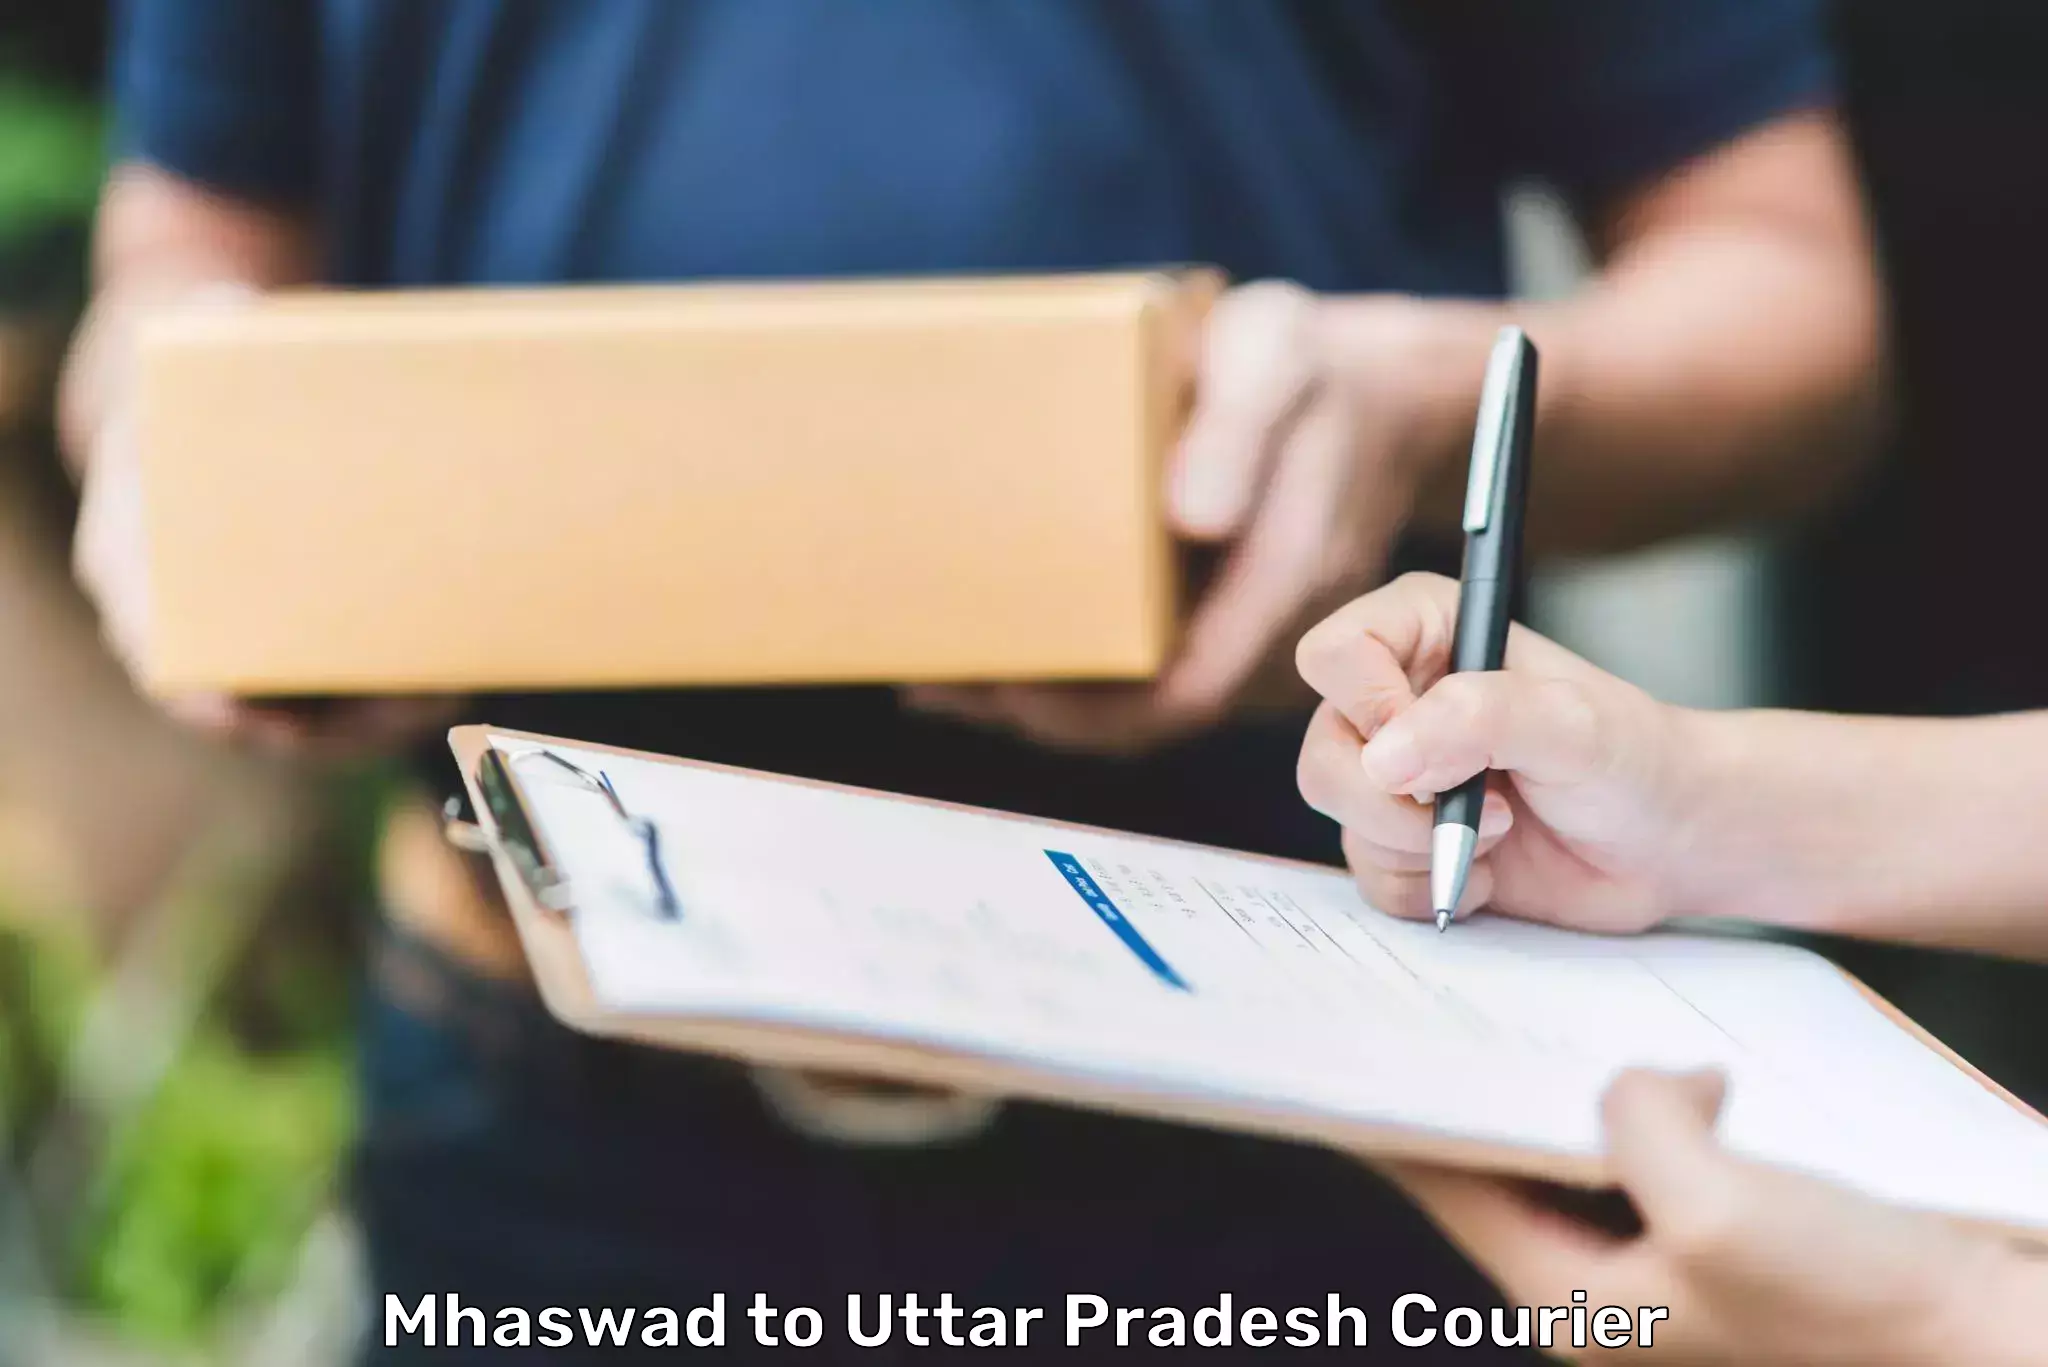 24/7 courier service Mhaswad to Fatehpur